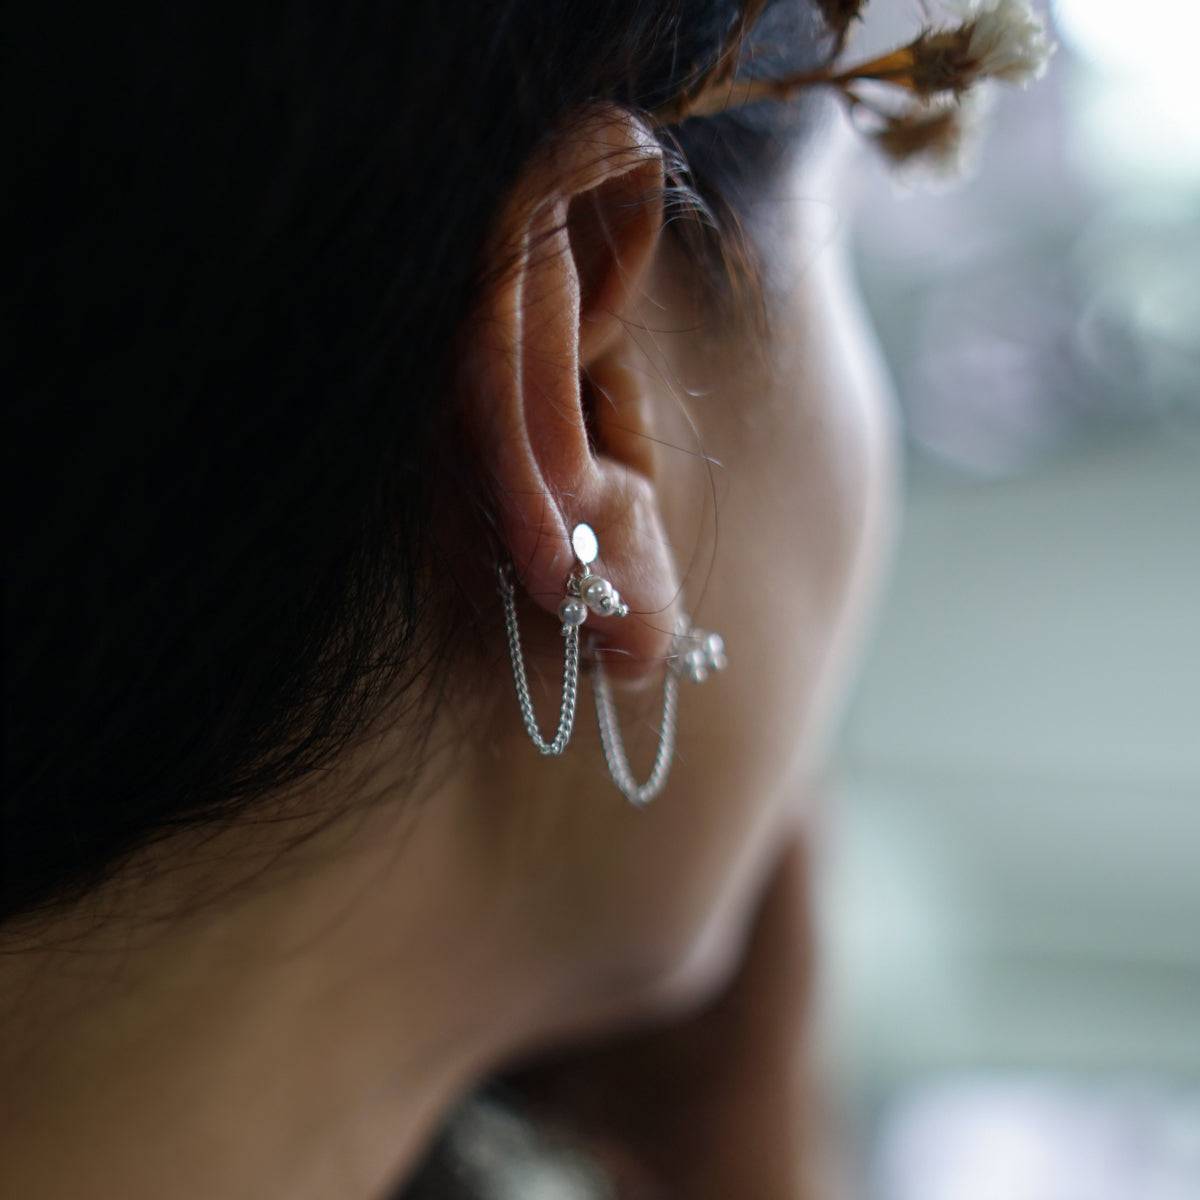 a close up of a person wearing a pair of ear cuffs